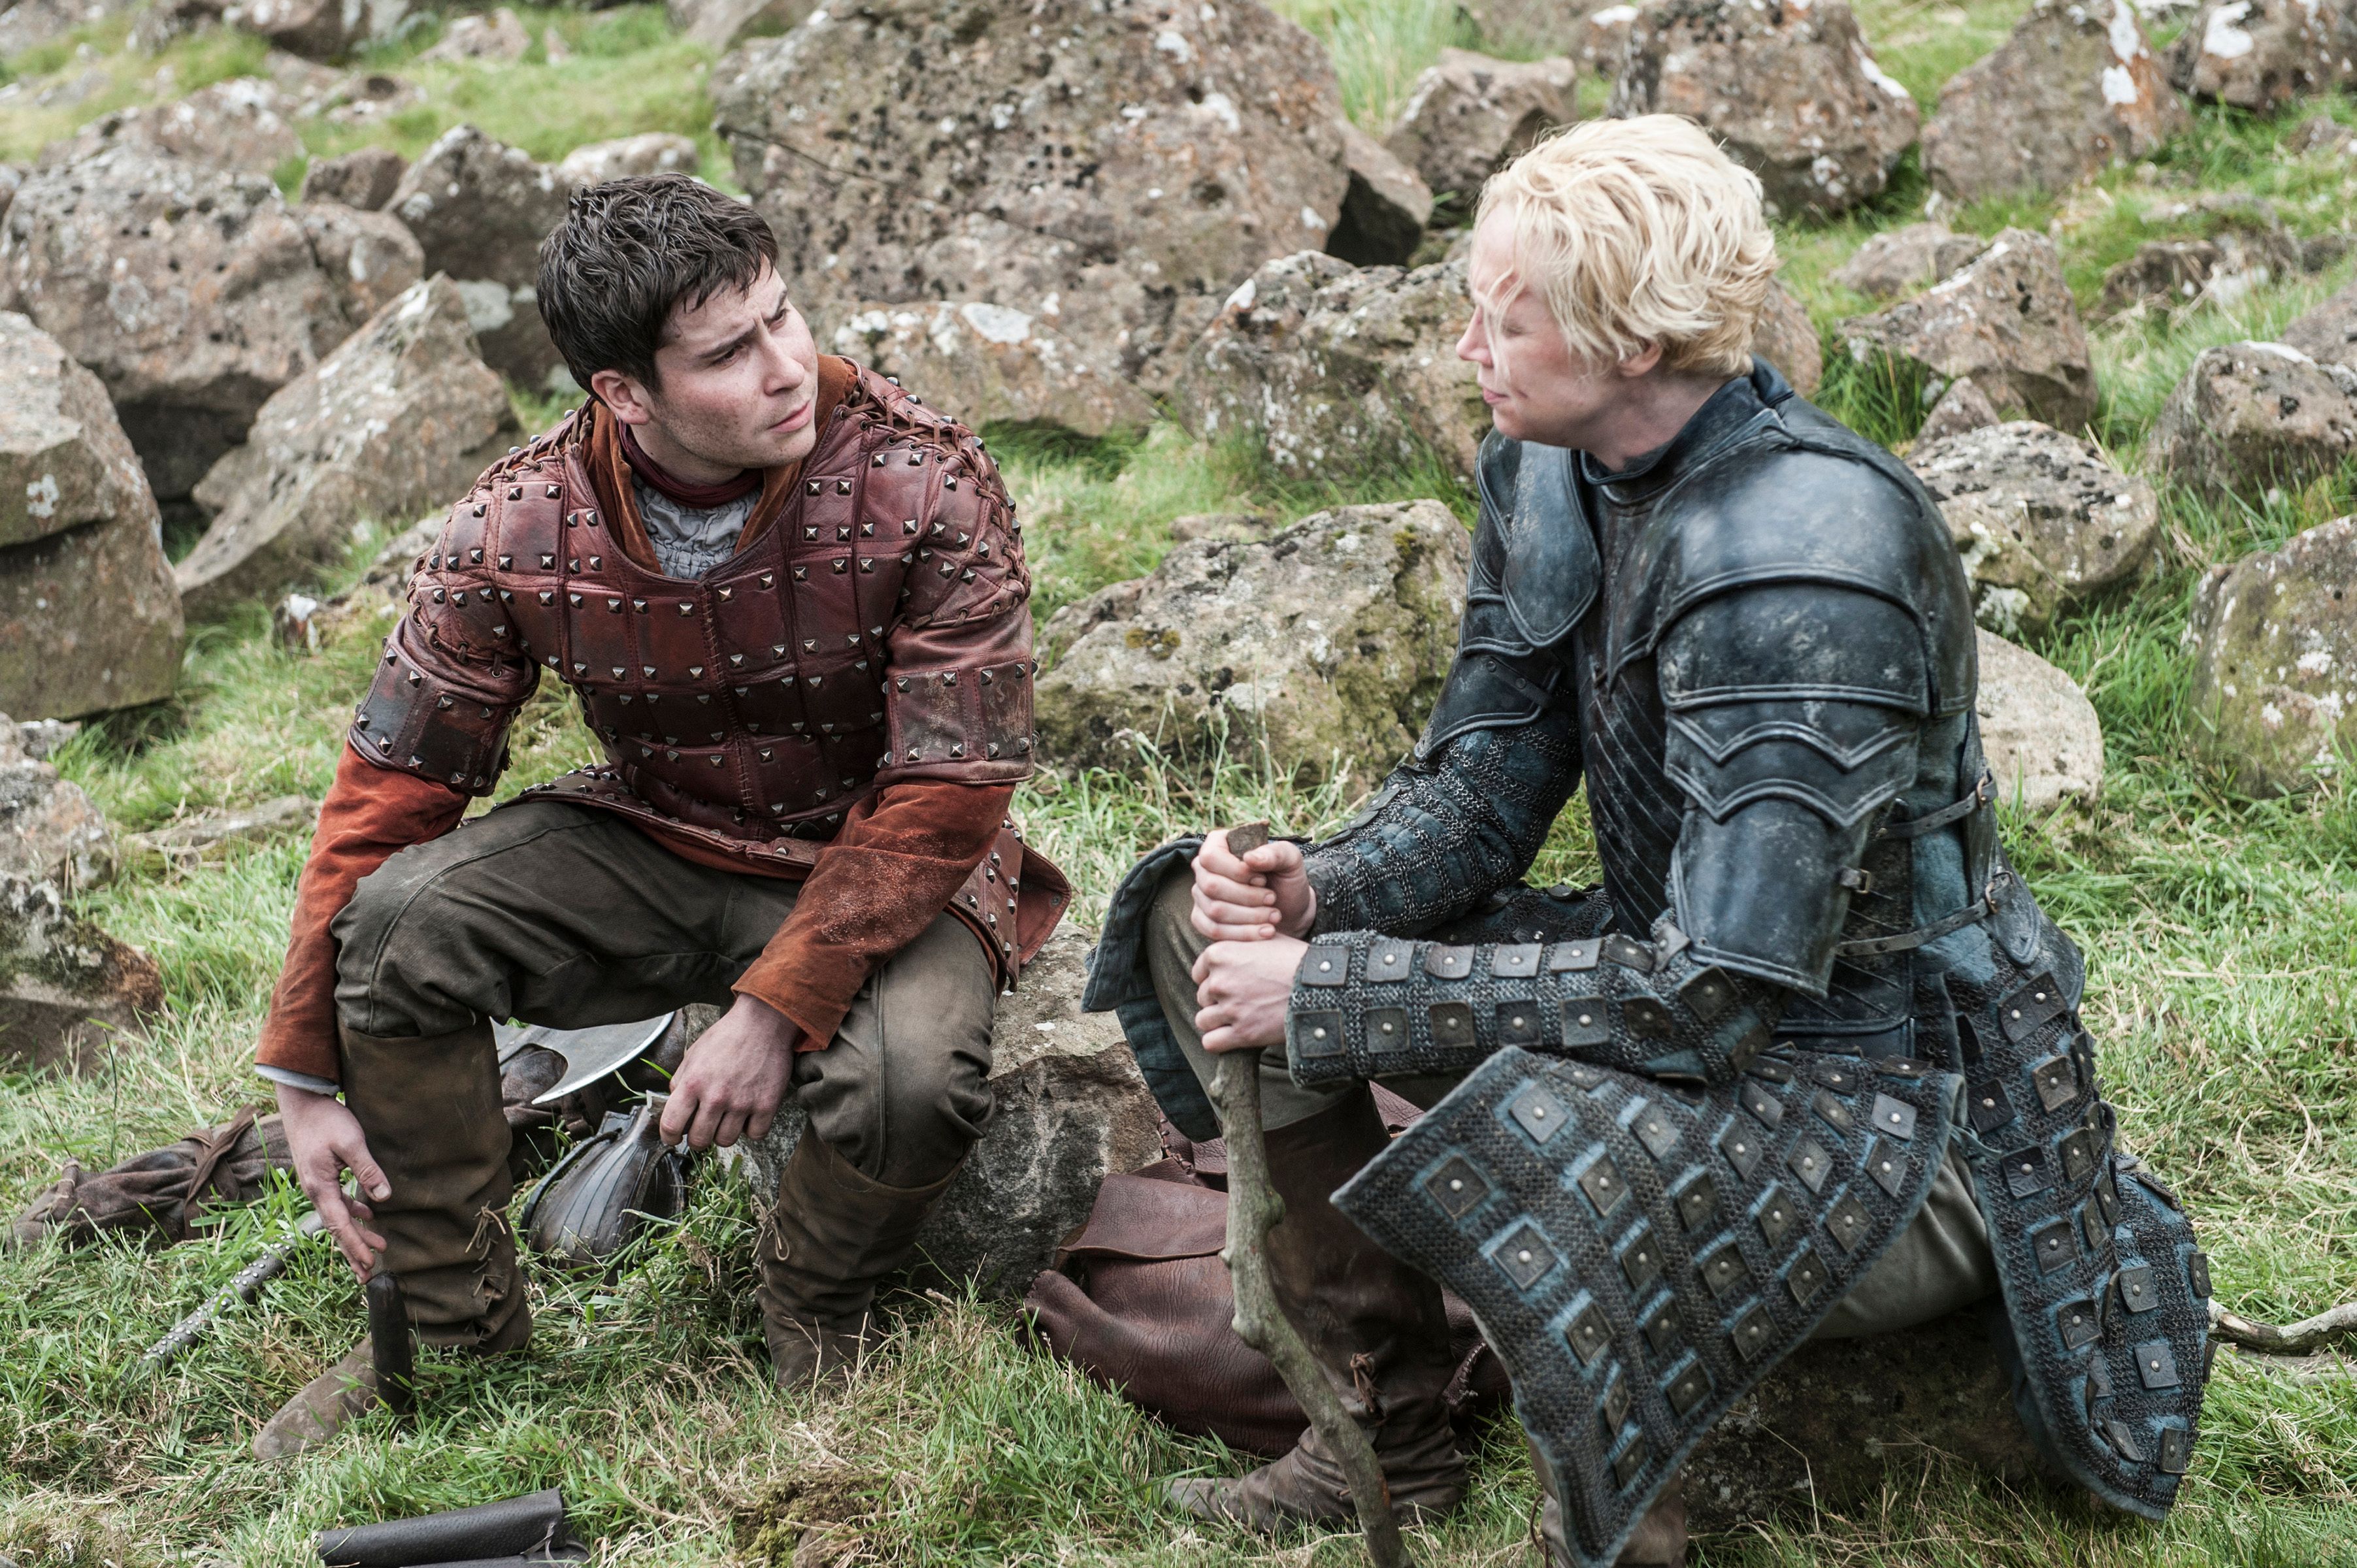 New GAME OF THRONES Season 5 Clips Tease Jon Snow and Brienne's Separa...